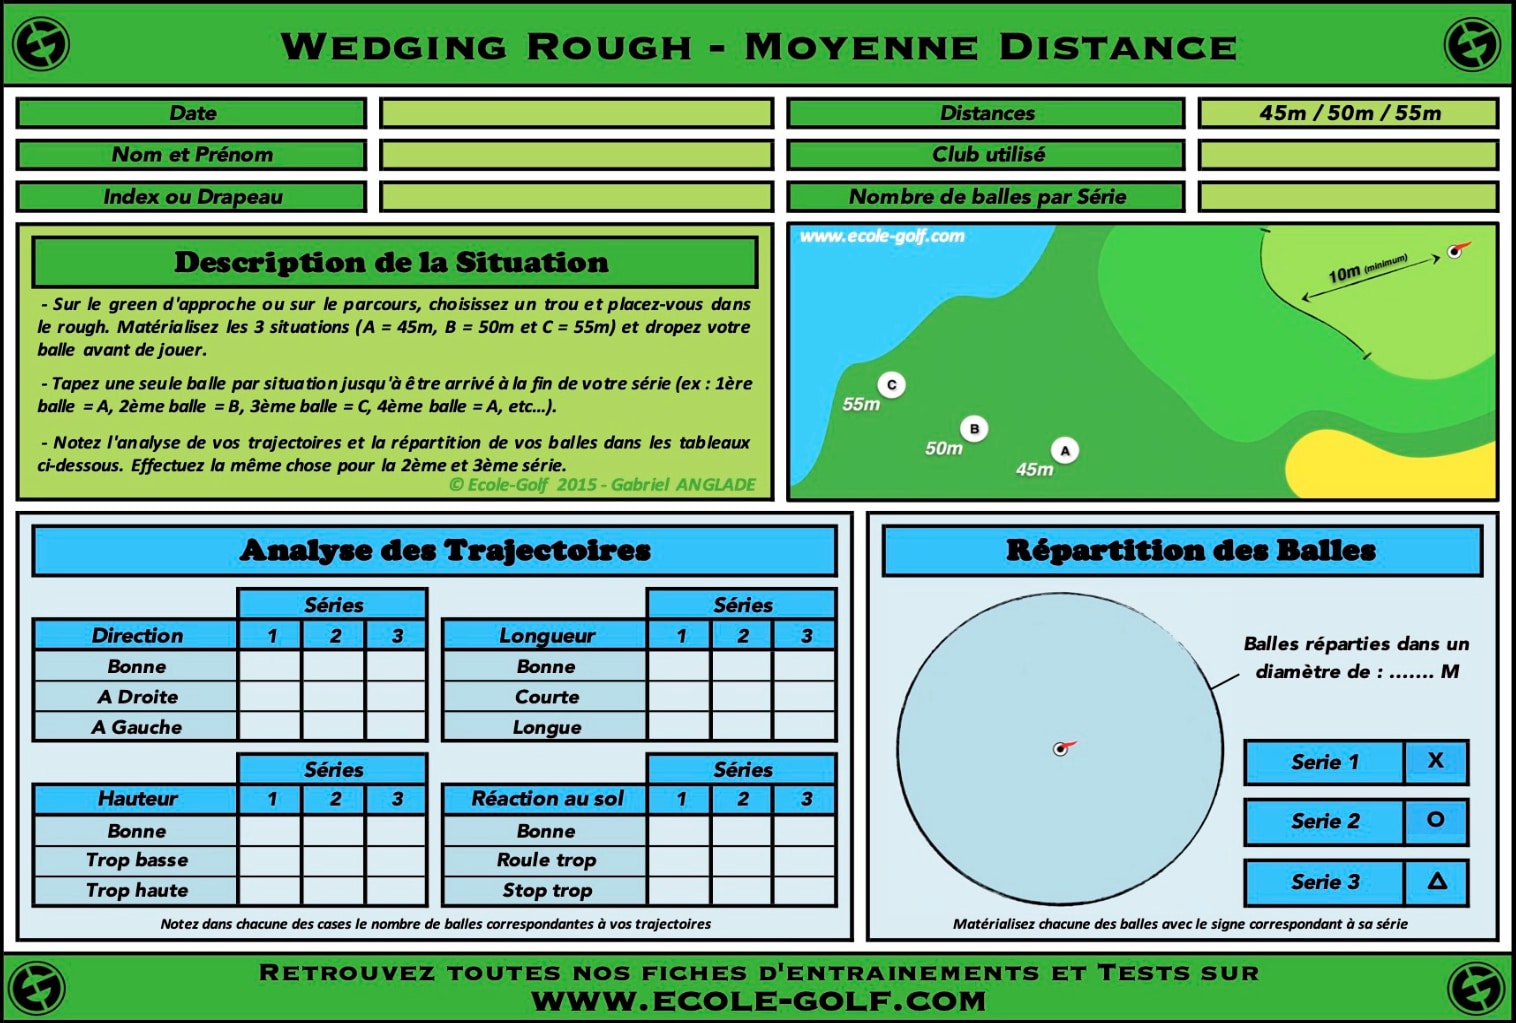 Wedging Rough - Moyenne Distance